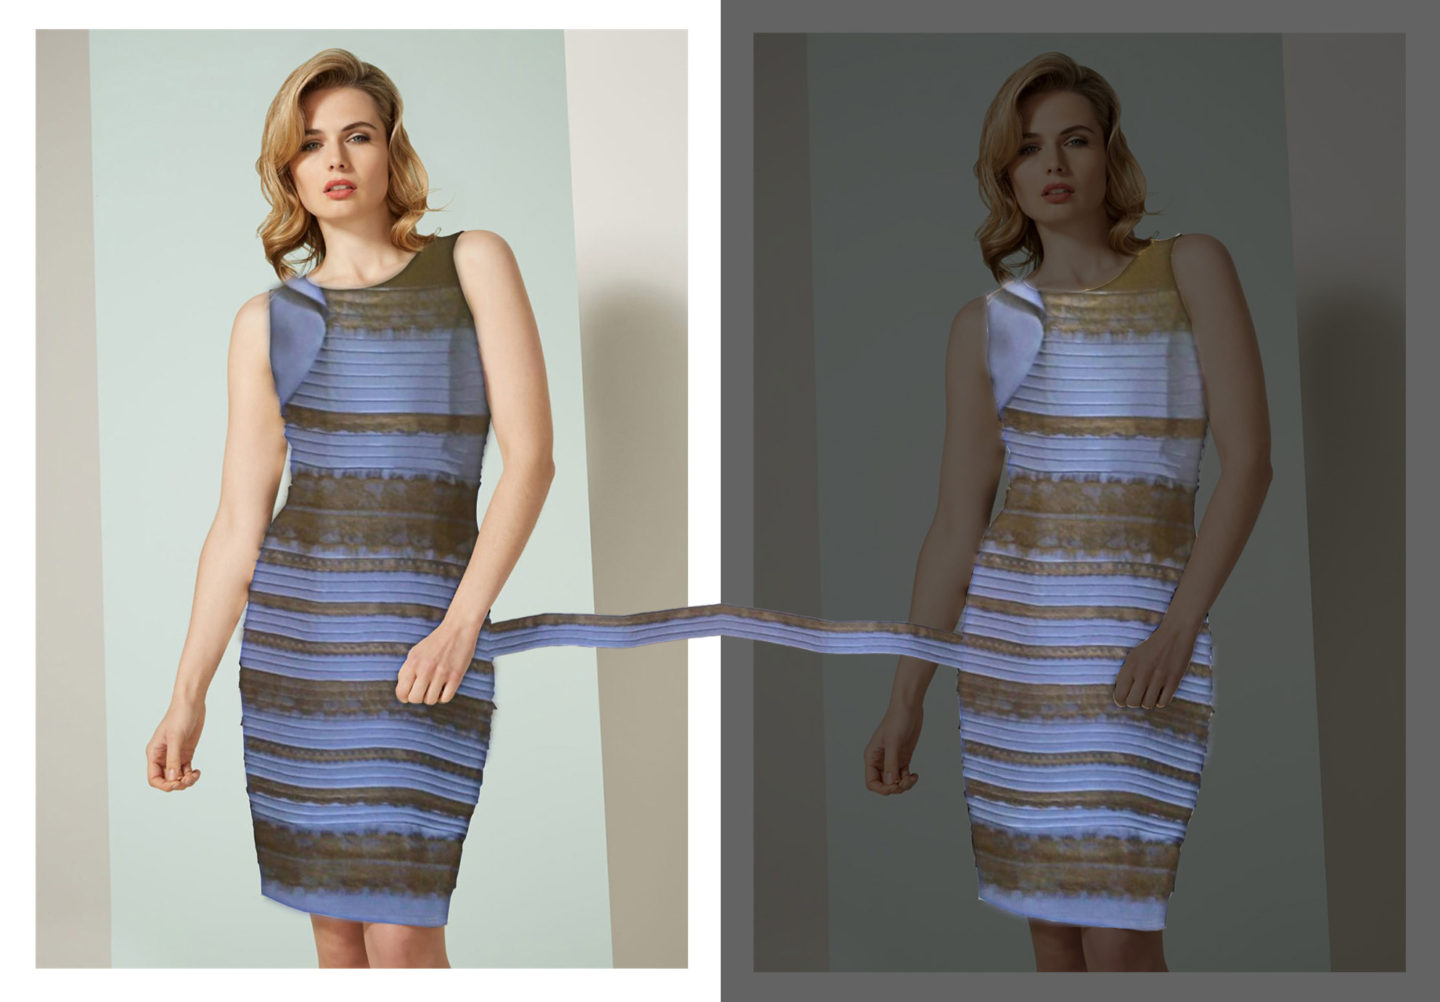 How does a black and blue dress sometimes appear white and gold? – The